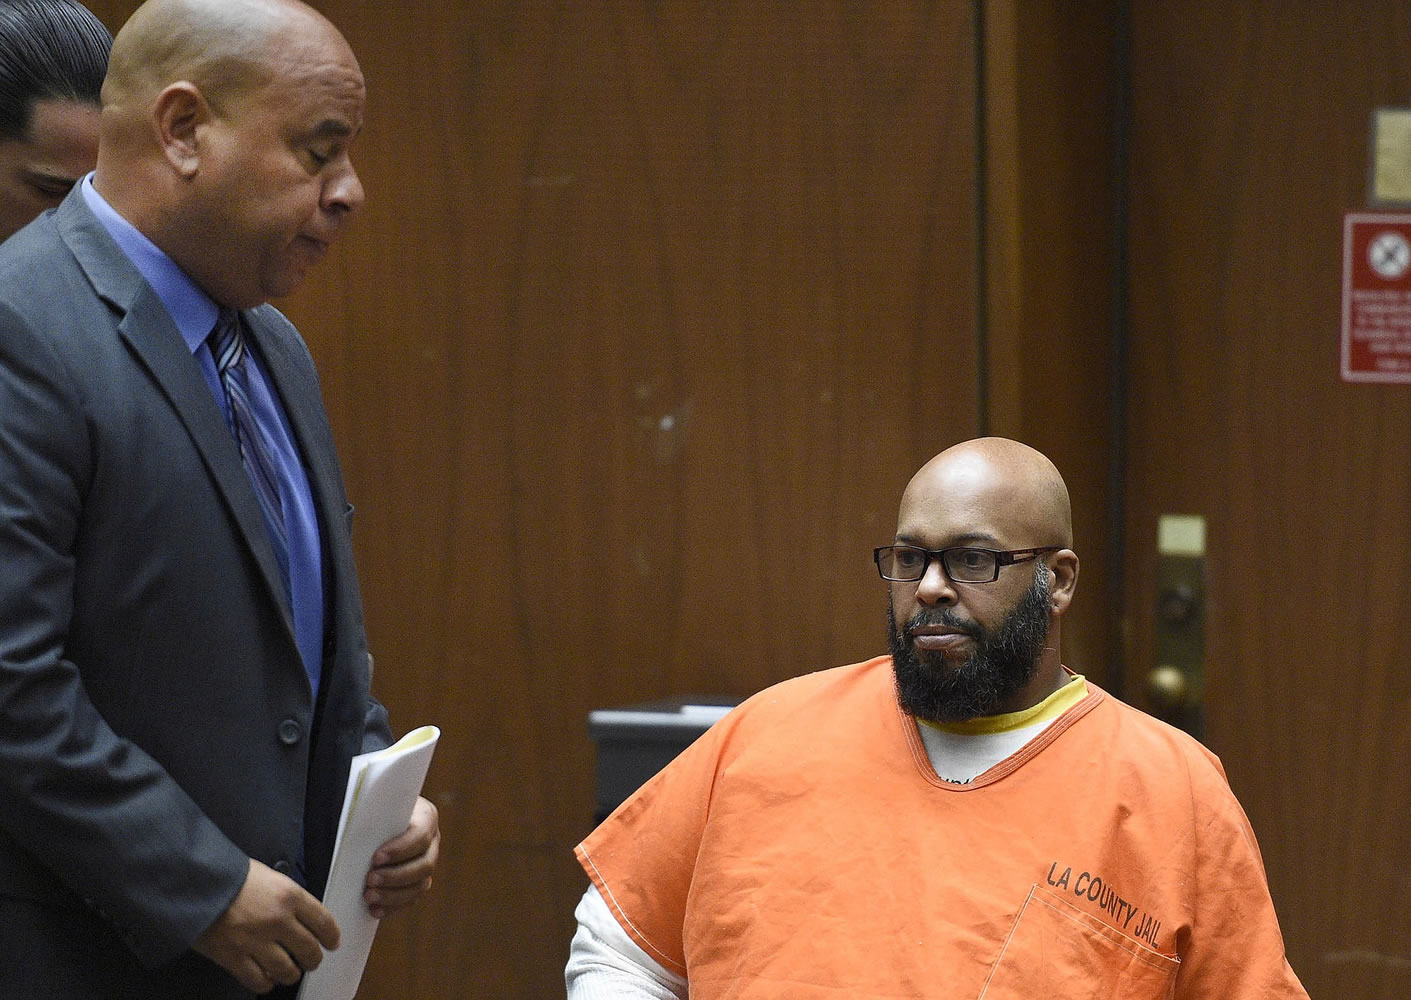 Marion &quot;Suge&quot; Knight, right, appears March 9 with his attorney Matthew Fletcher in court for a hearing about evidence in his murder case in Los Angeles, Calif.  Los Angeles prosecutors are asking a judge to set bail in a murder case against the former rap music mogul Knight at $25 million, citing his violent history. The motion filed by Deputy District Attorney Cynthia Barnes on Thursday cites 31 incidents in which Knight is accused of threatening others or using violence.